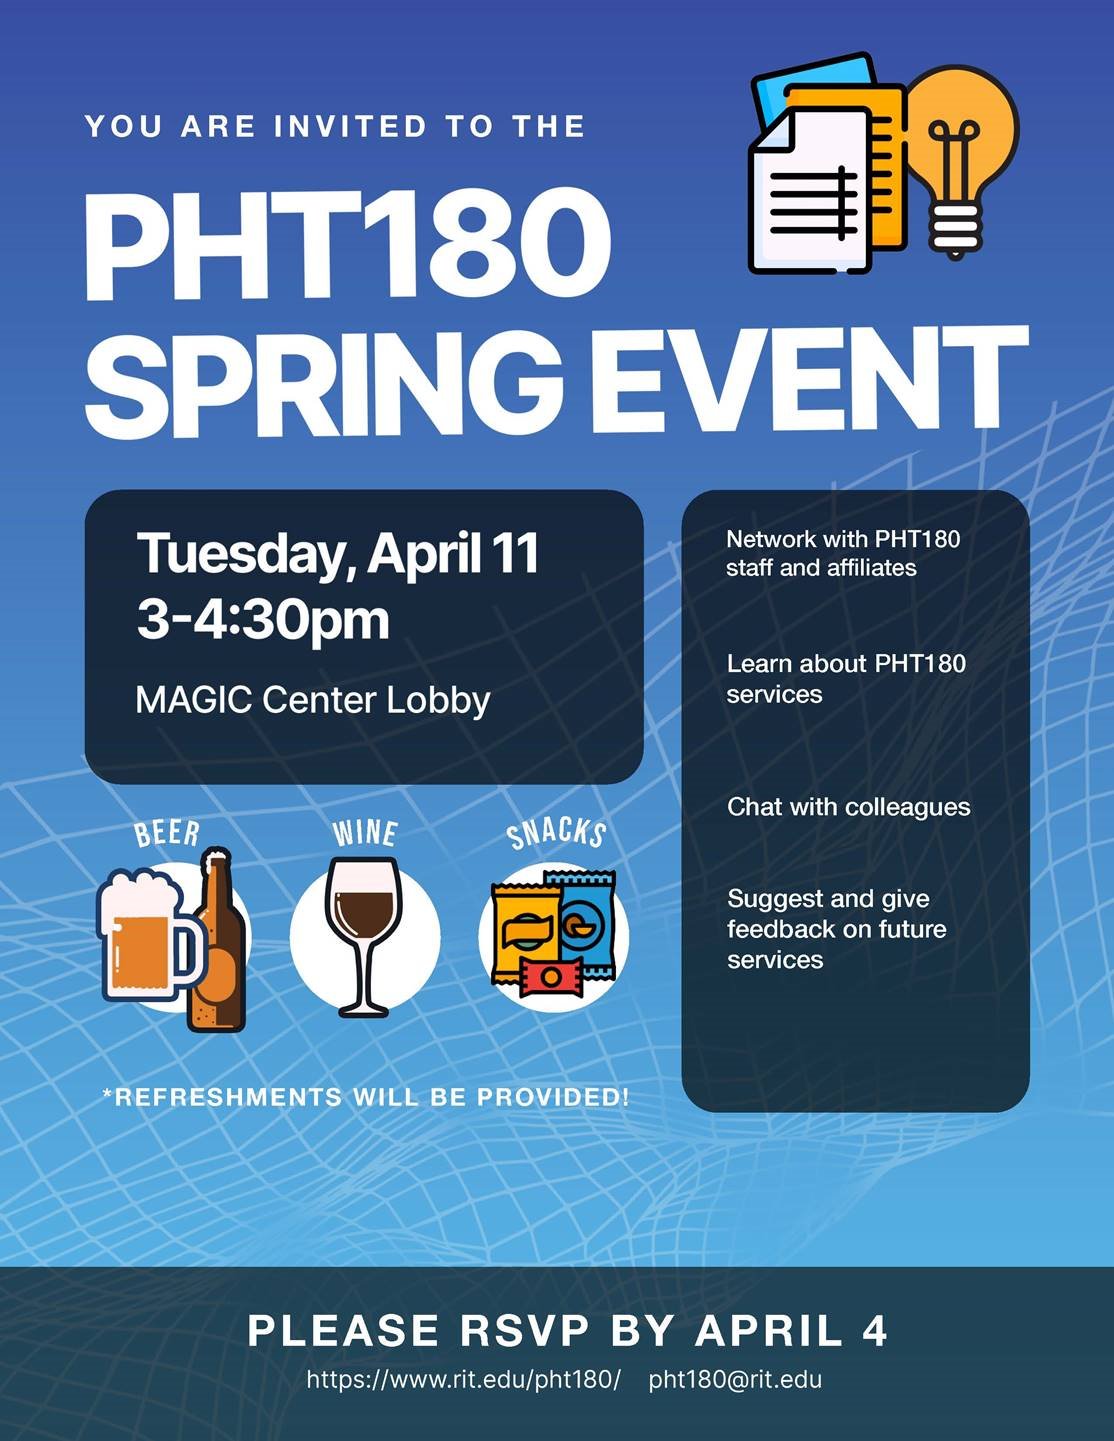 PHT180 Spring Event April 11 3 to 4:30pm MAGIC Center lobby